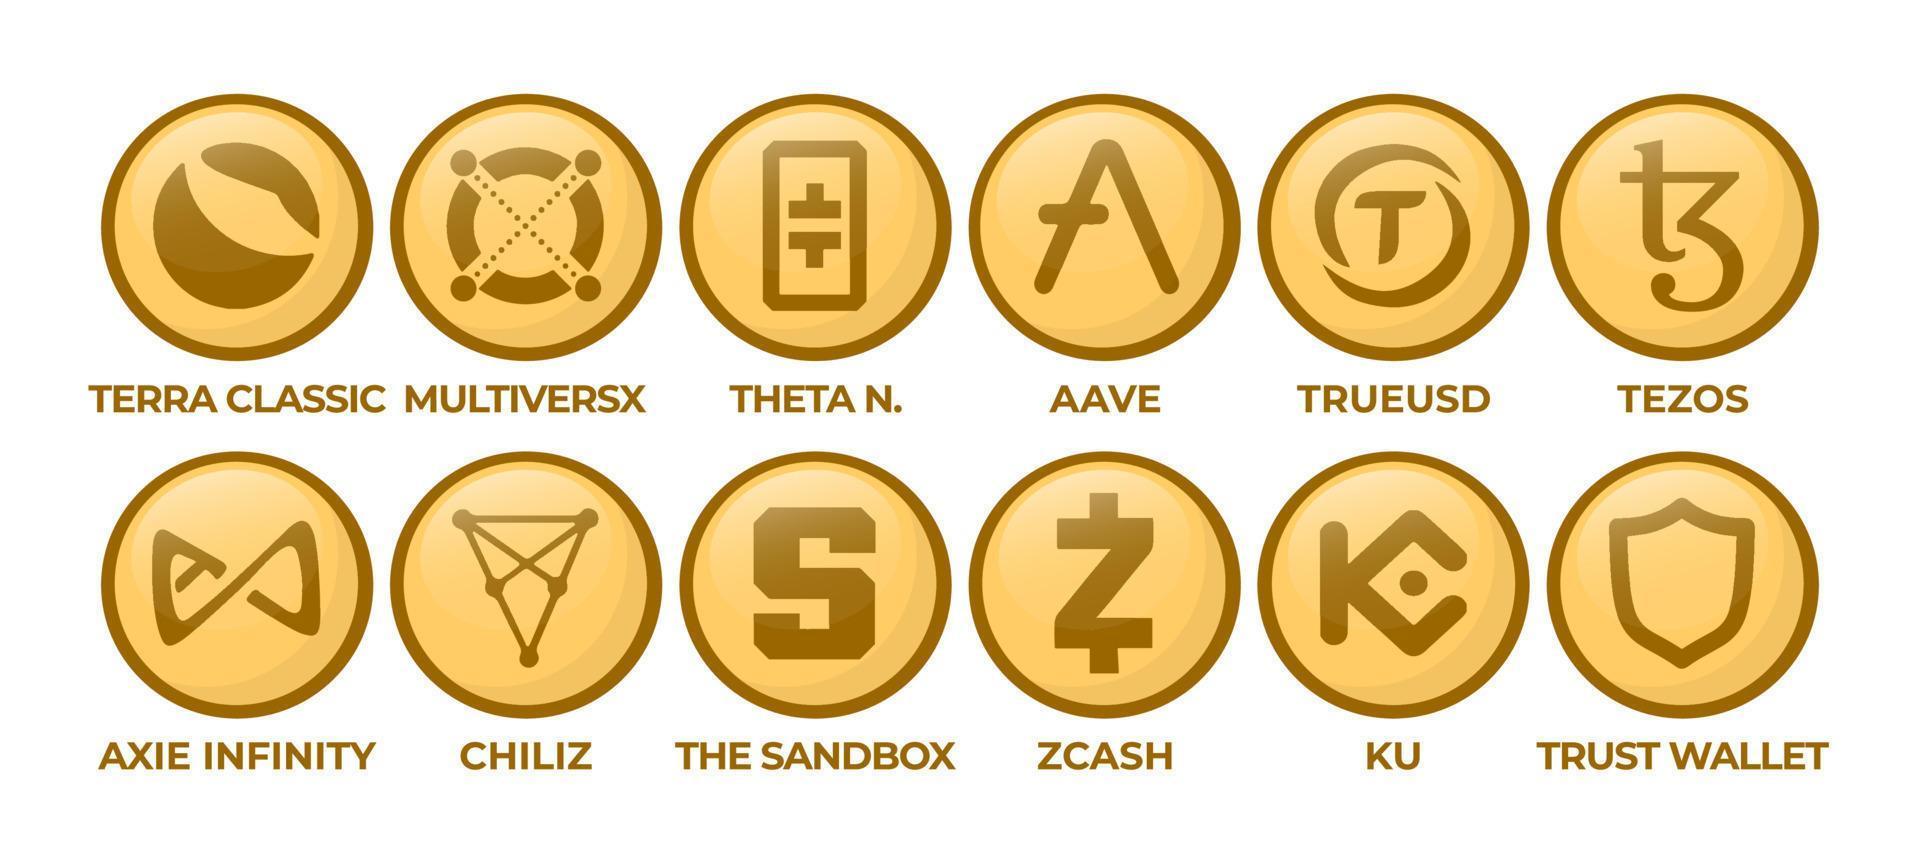 Set of Cryptocurrency Logo Coins Terra Classic, MultiversX, Theta Network, Aave, TrueUSD, Tezos, Axie Infinity, Chiliz, The Sandbox, Zcash, KuCoin, Trust Wallet vector